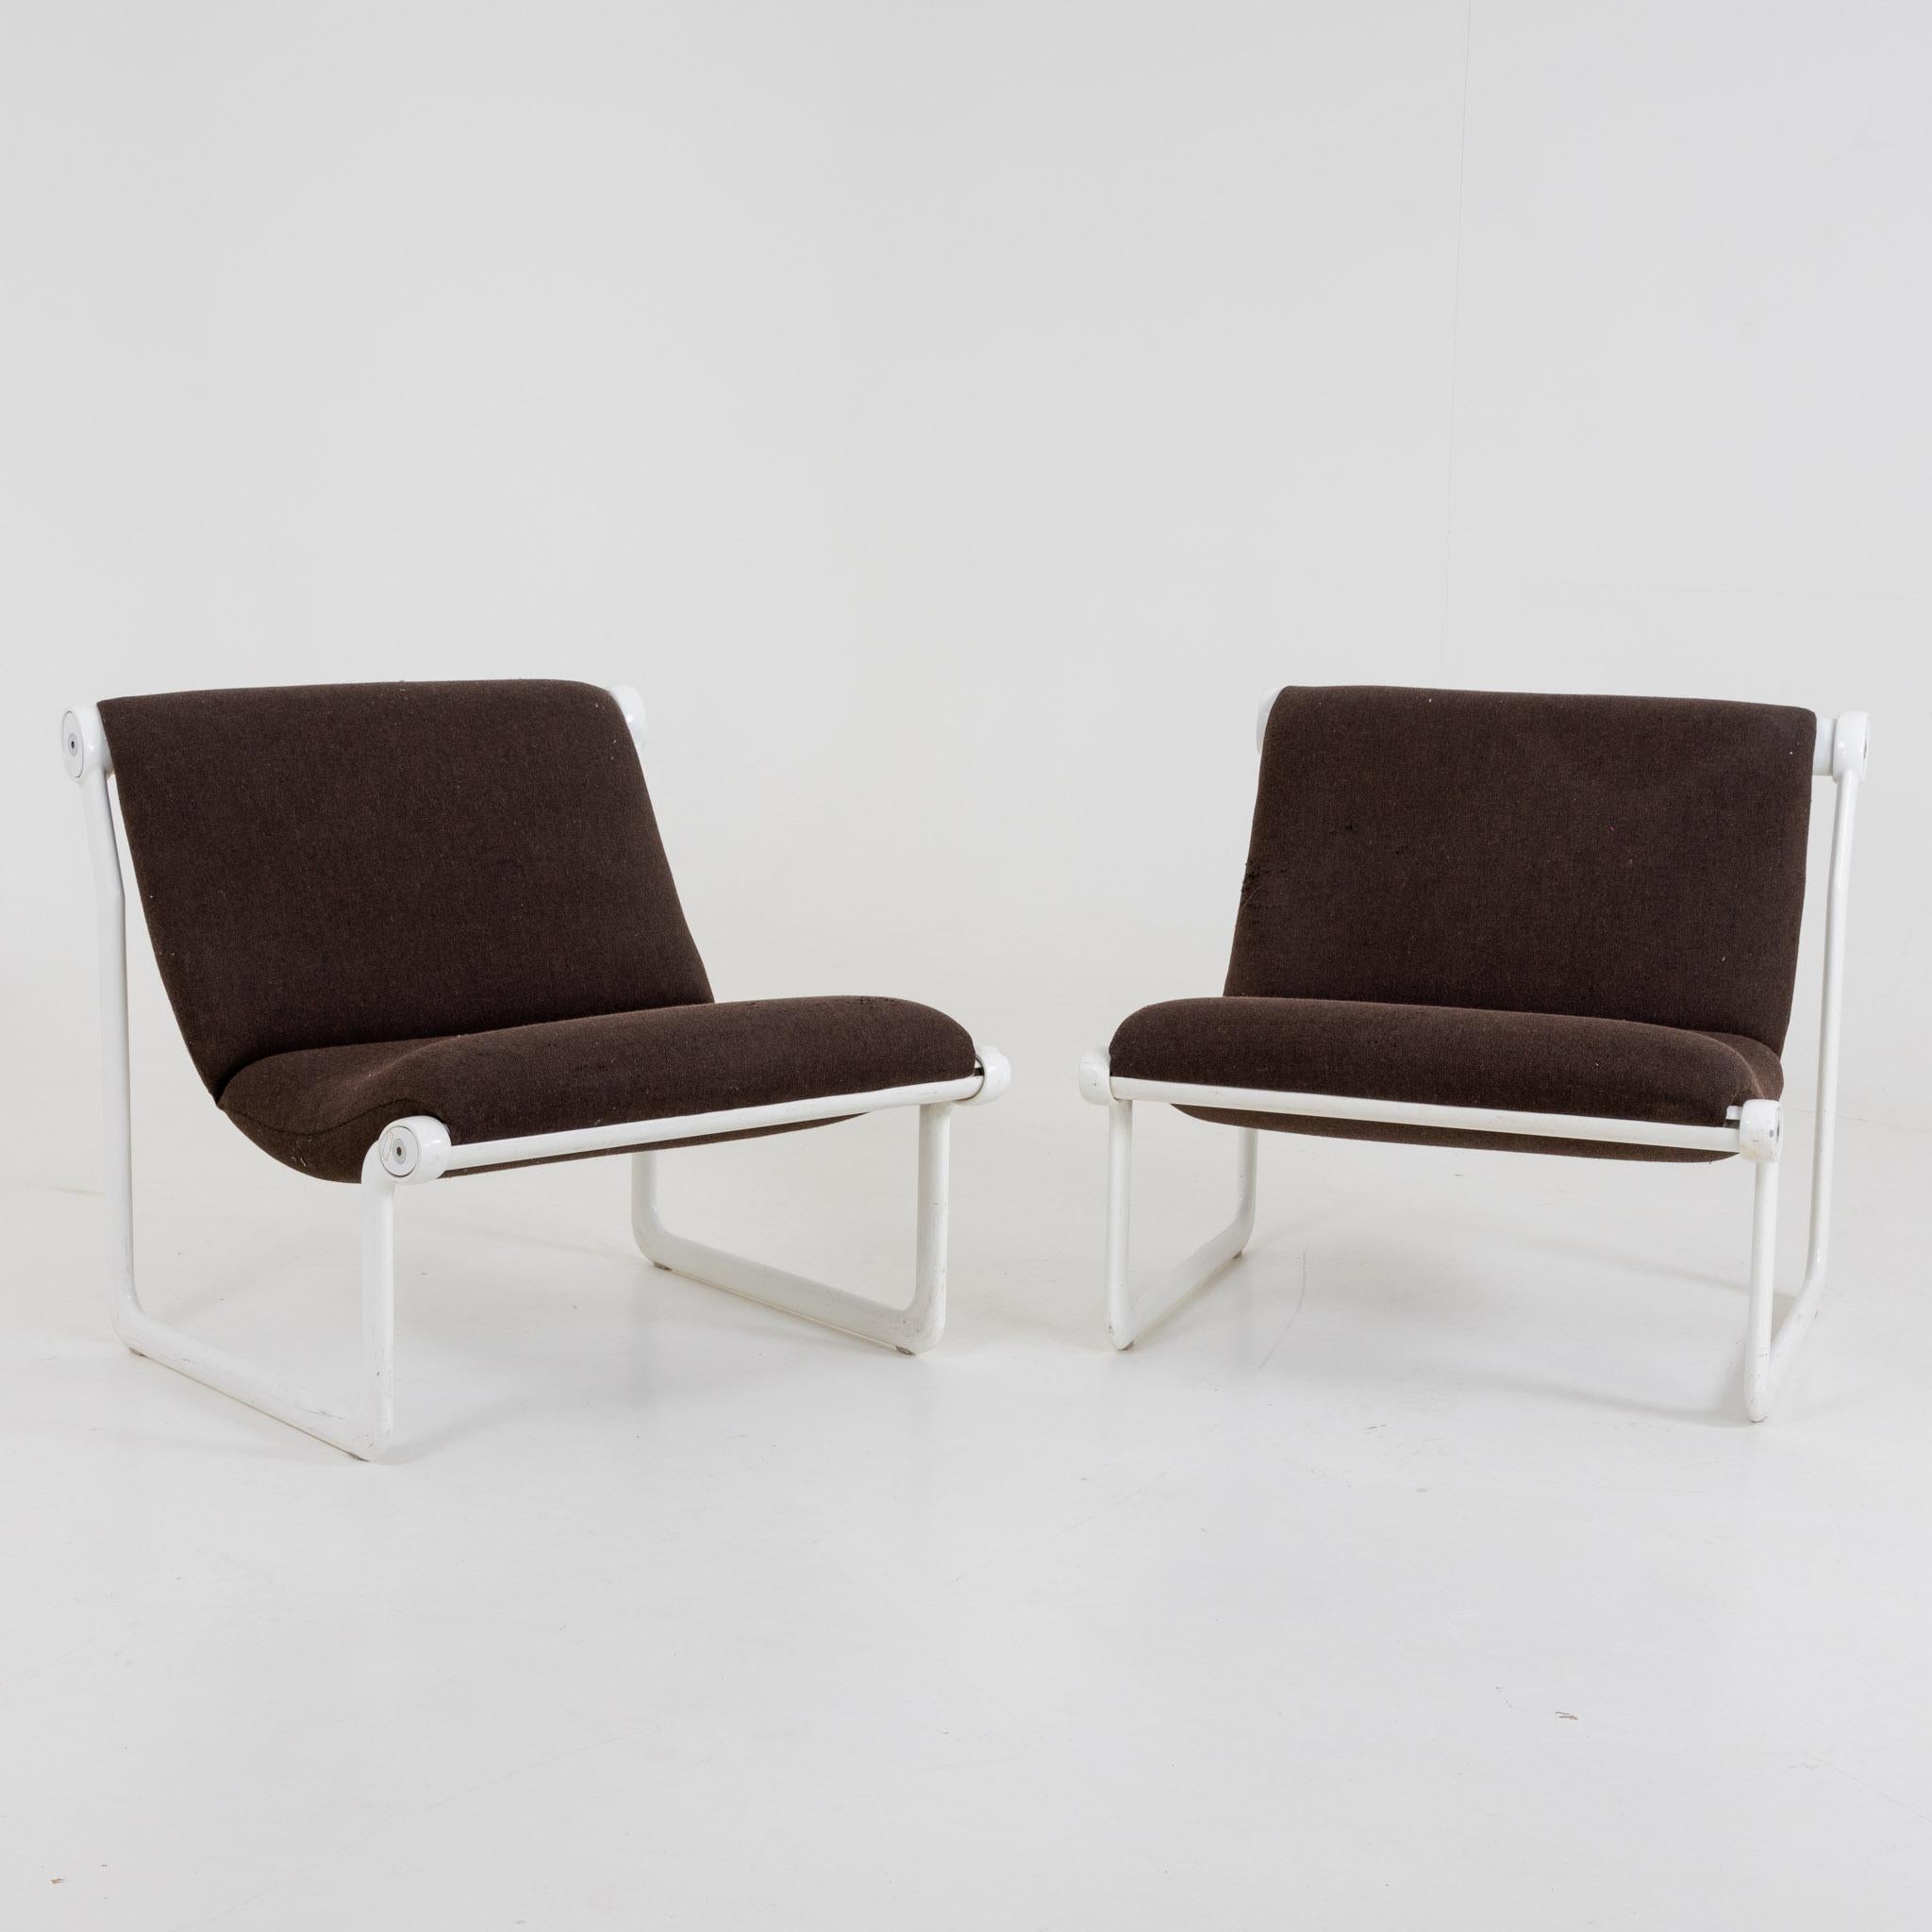 Pair of sling lounge chairs with white aluminum frames and brown cover.